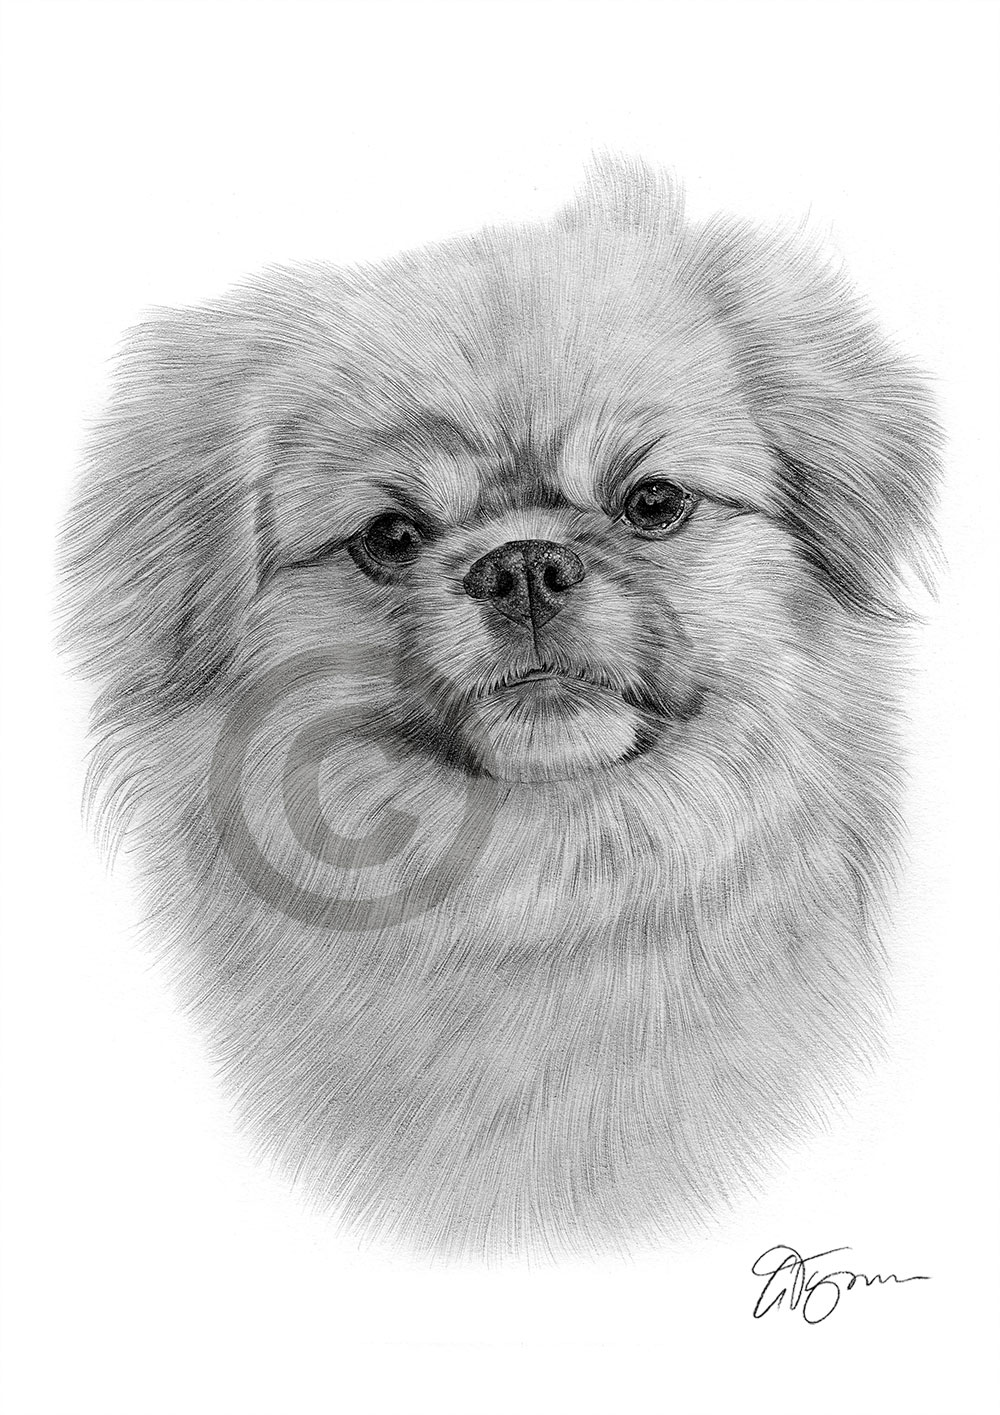 Pencil drawing of a young Tibetan Spaniel by artist Gary Tymon